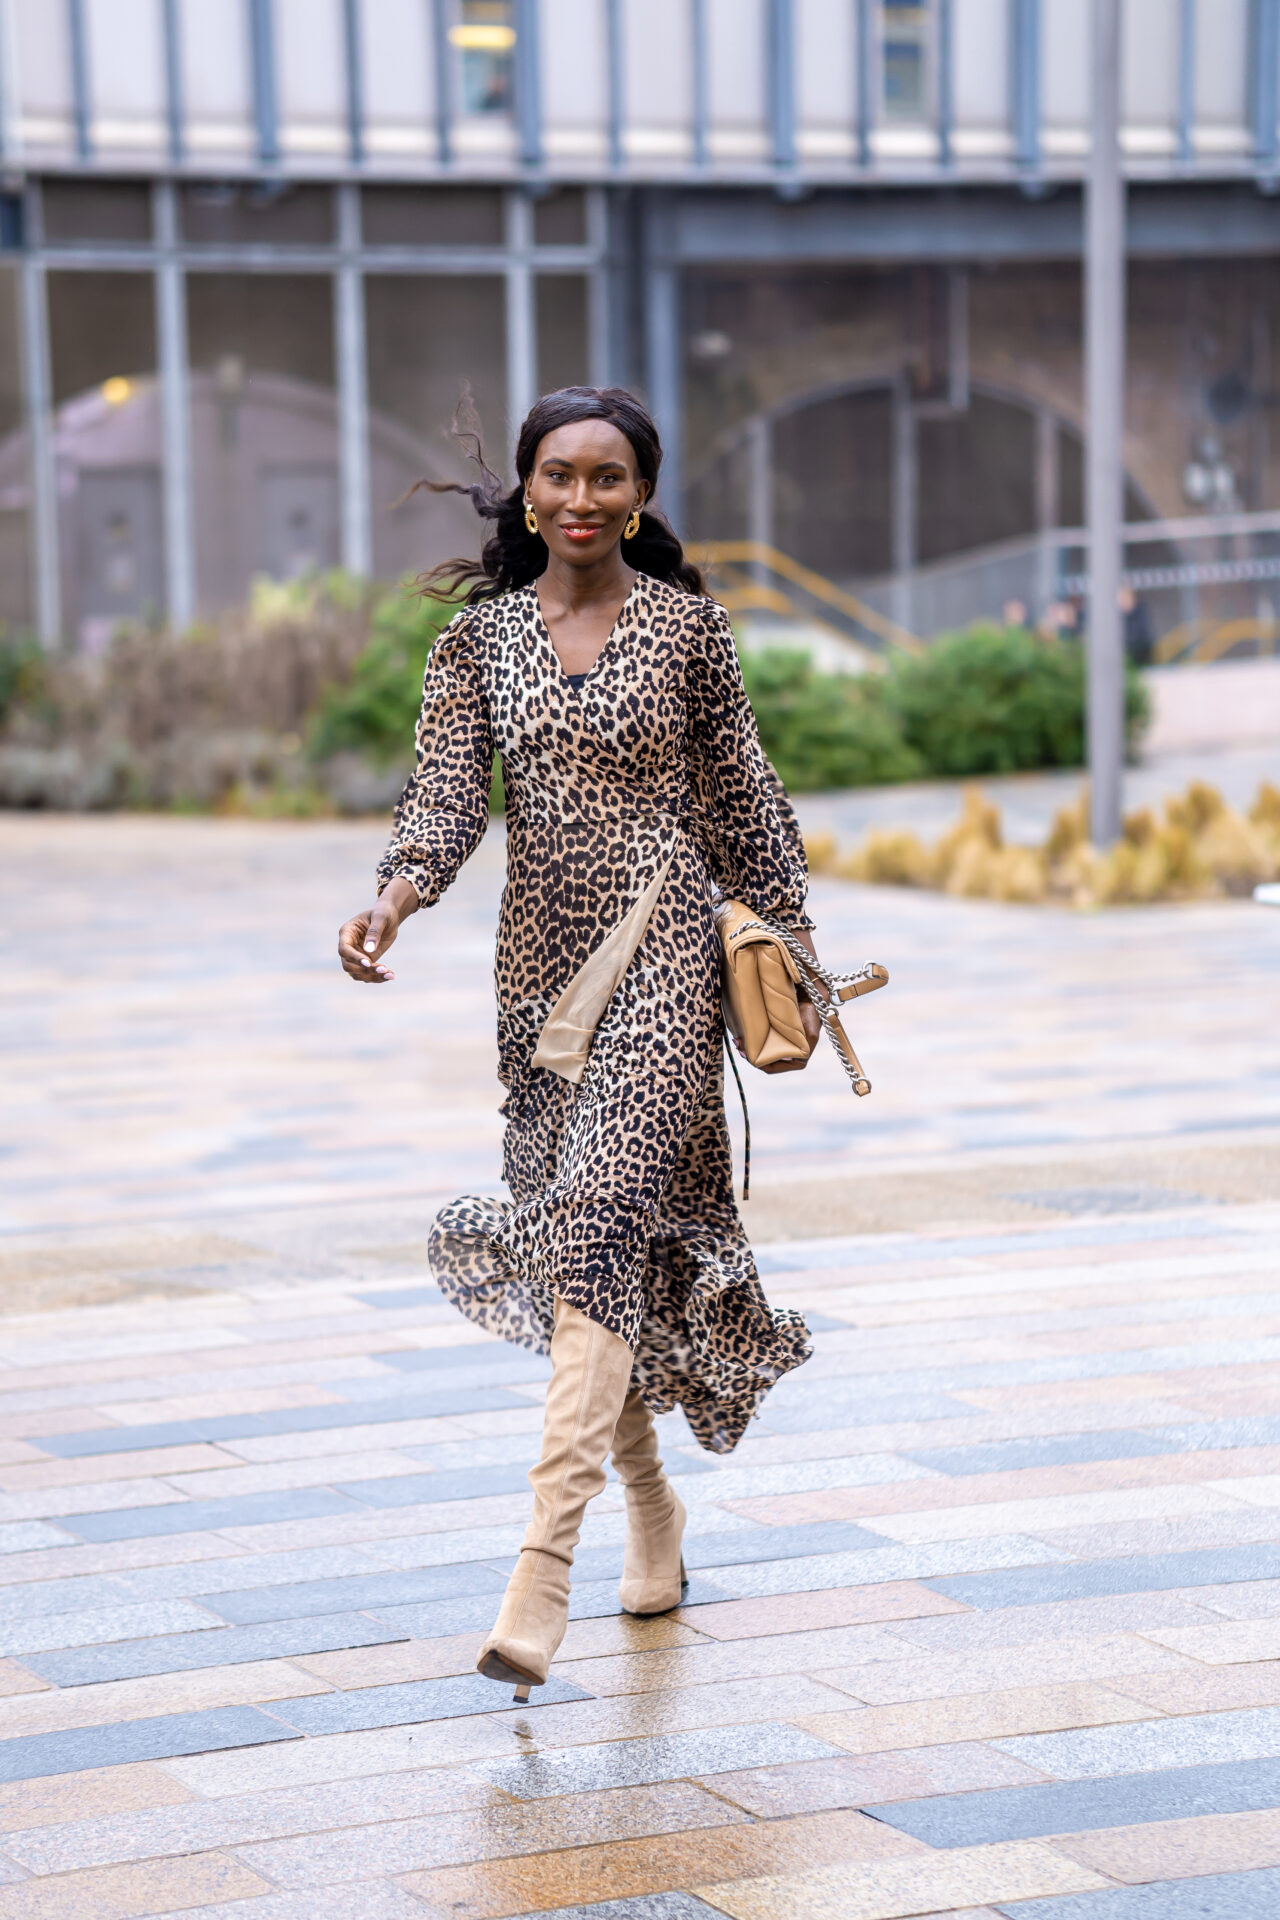 Leopard print dress for all Spring Occasions: Get to know me